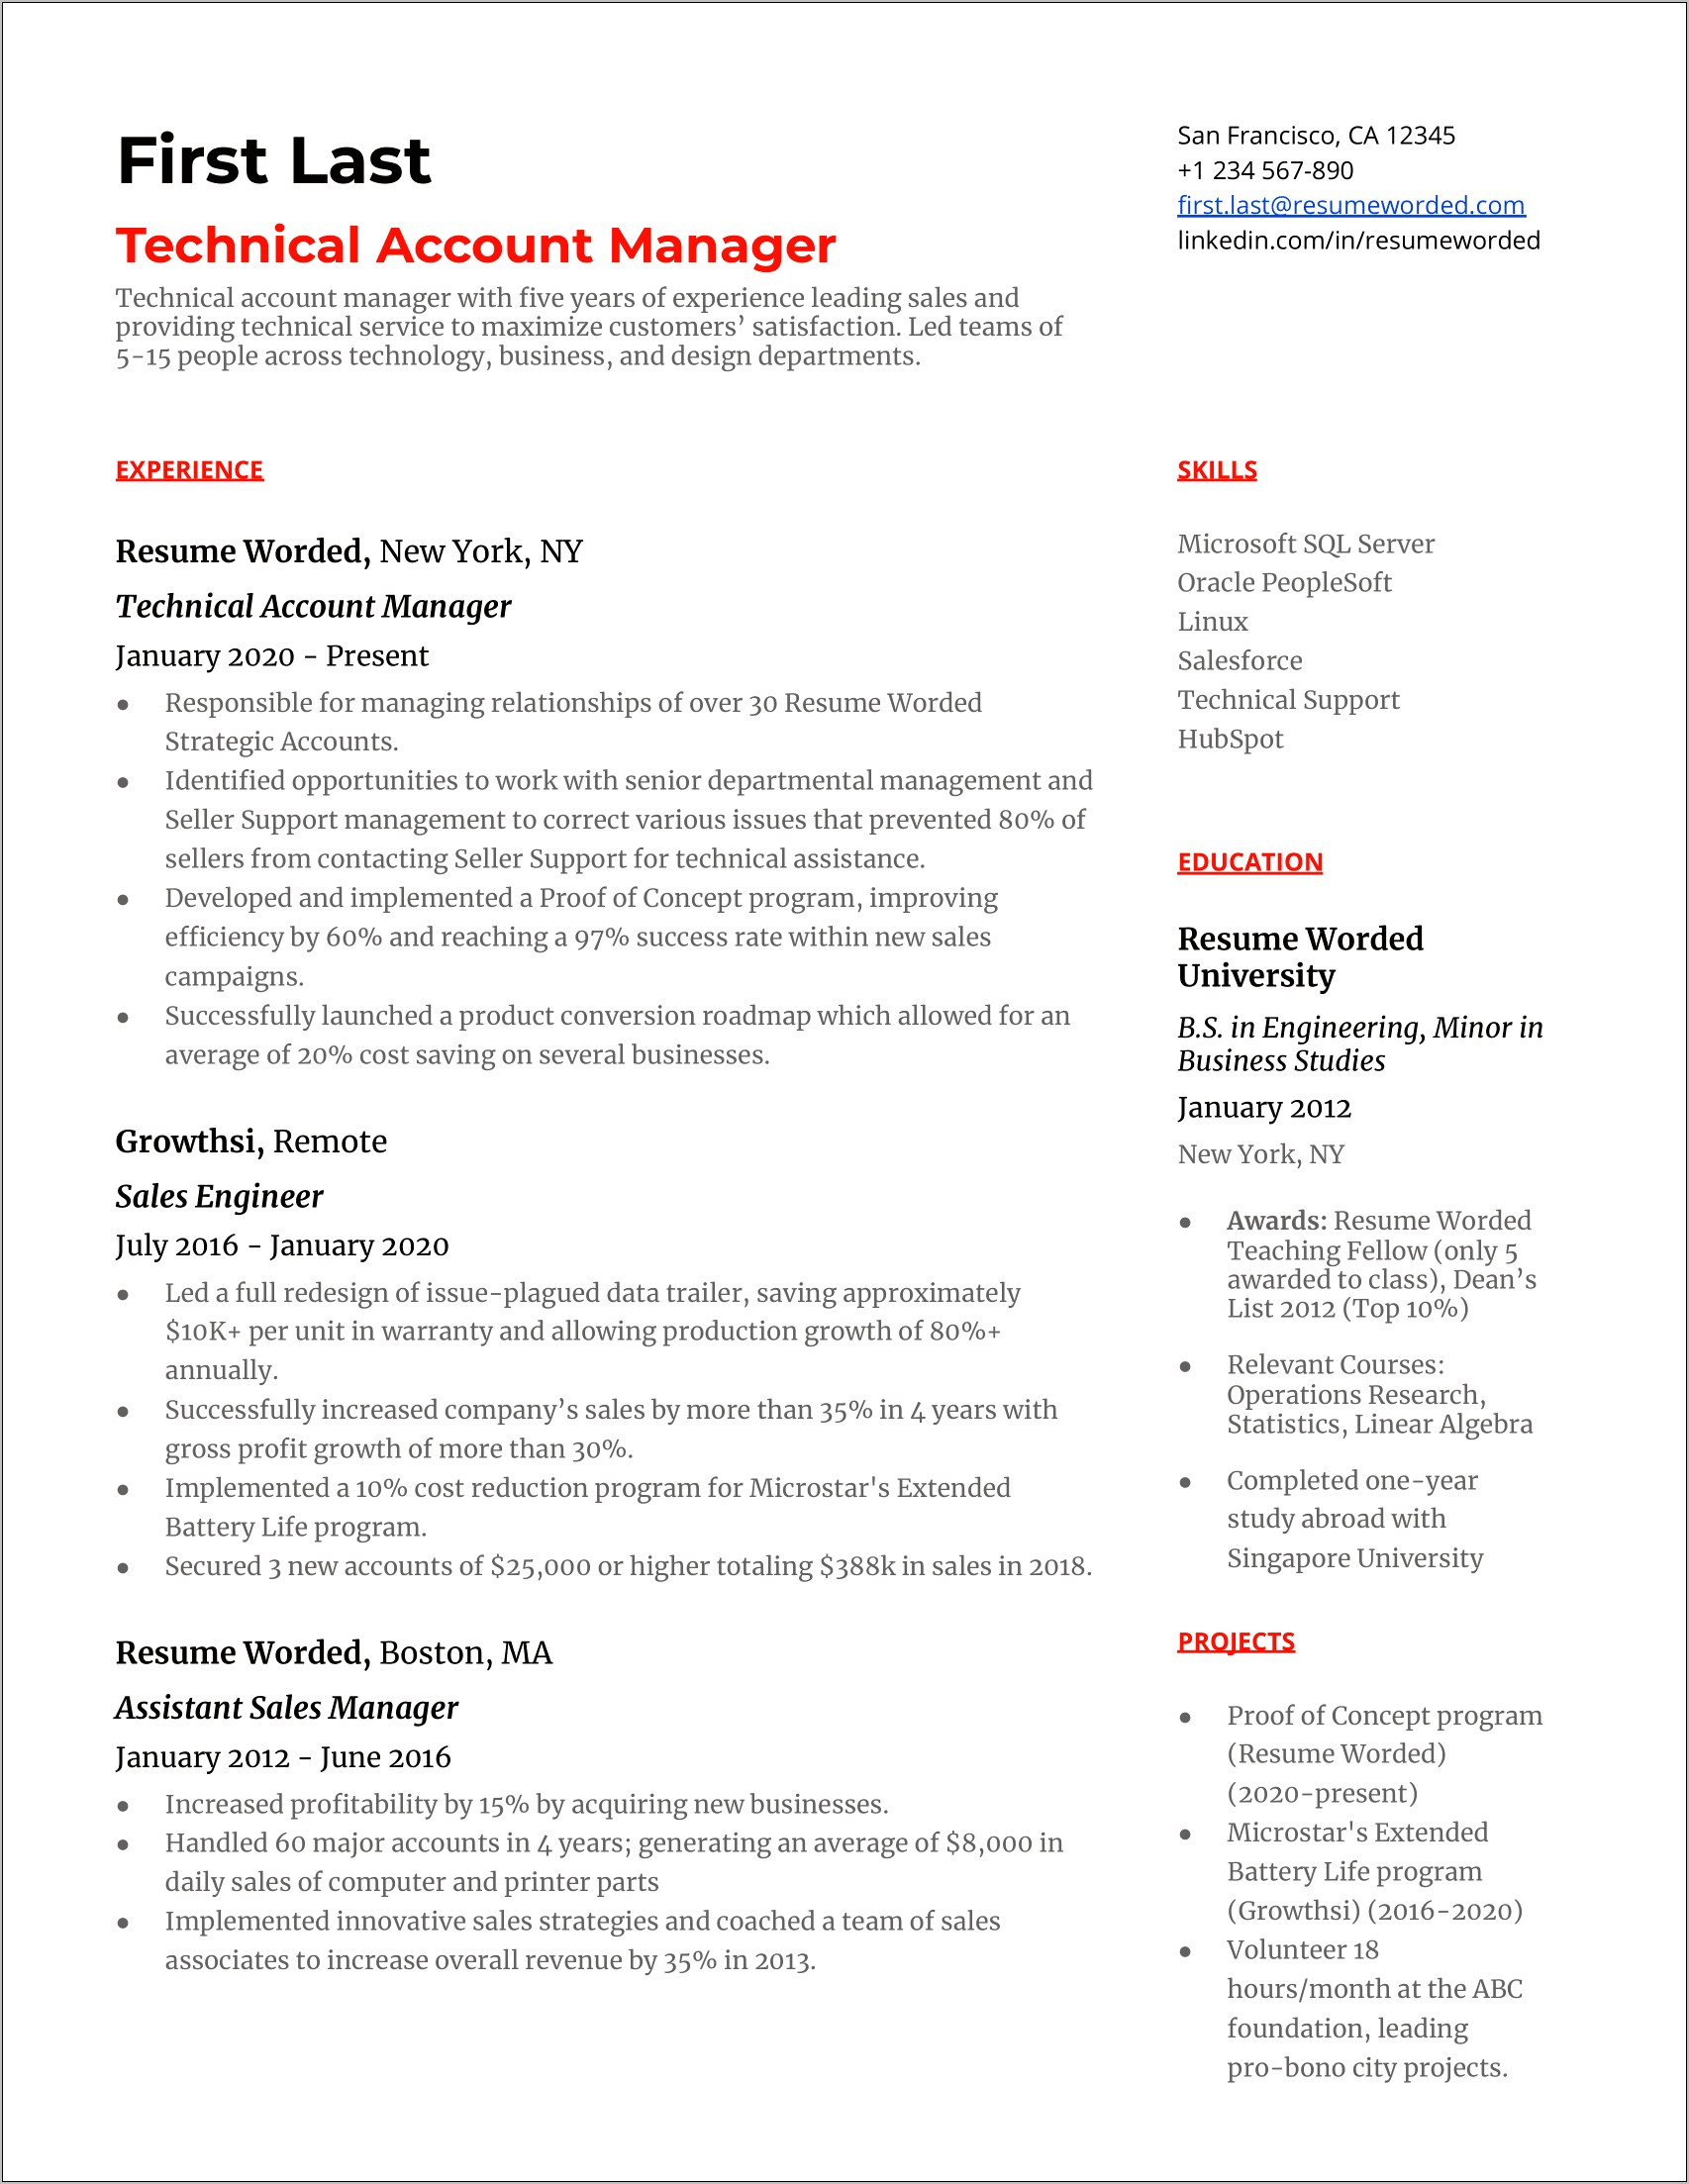 Real Estate Account Manager Resume Sample